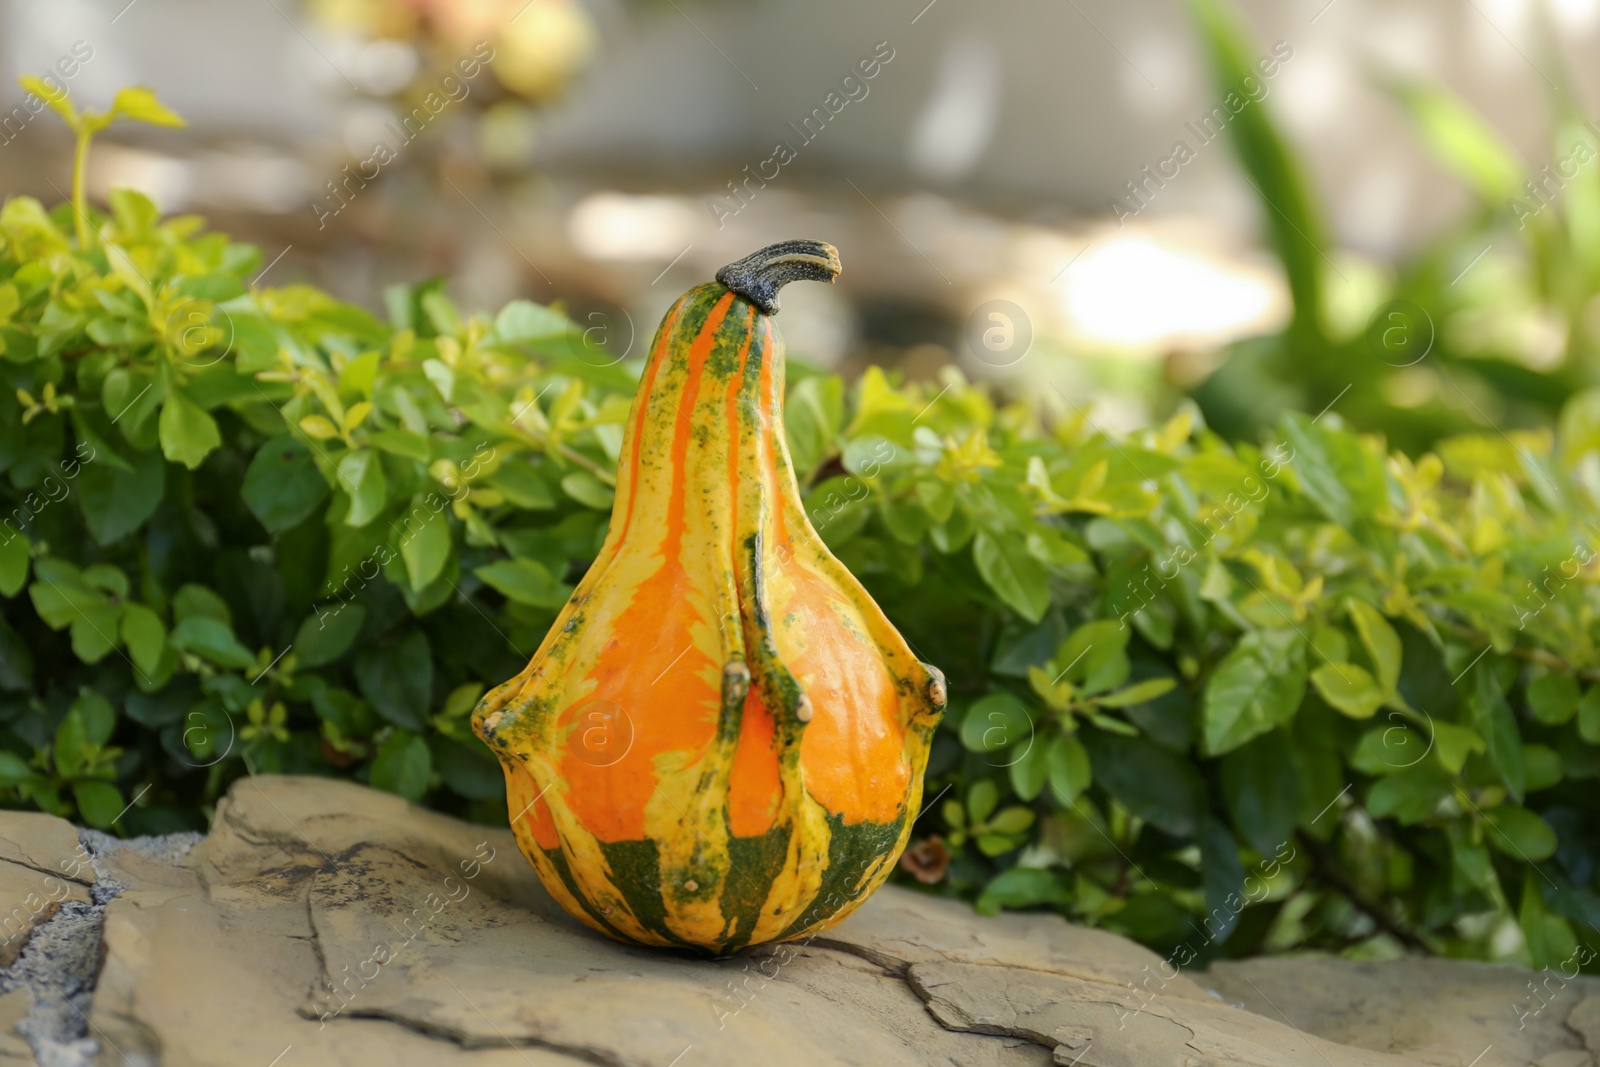 Photo of Whole ripe pumpkin on stone surface outdoors